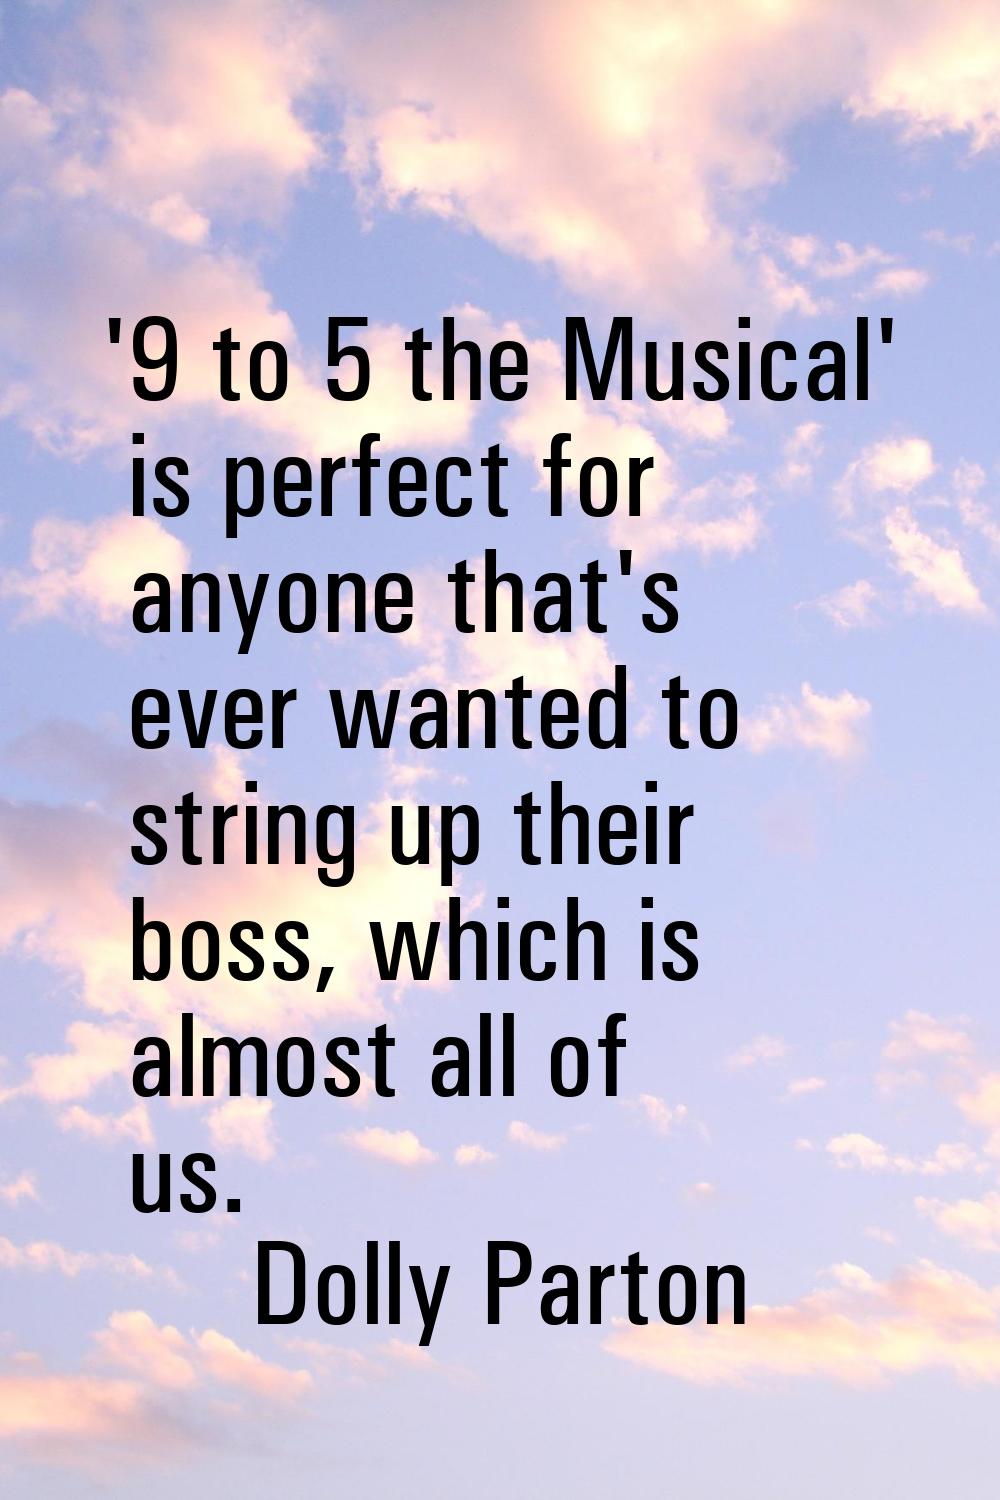 '9 to 5 the Musical' is perfect for anyone that's ever wanted to string up their boss, which is alm